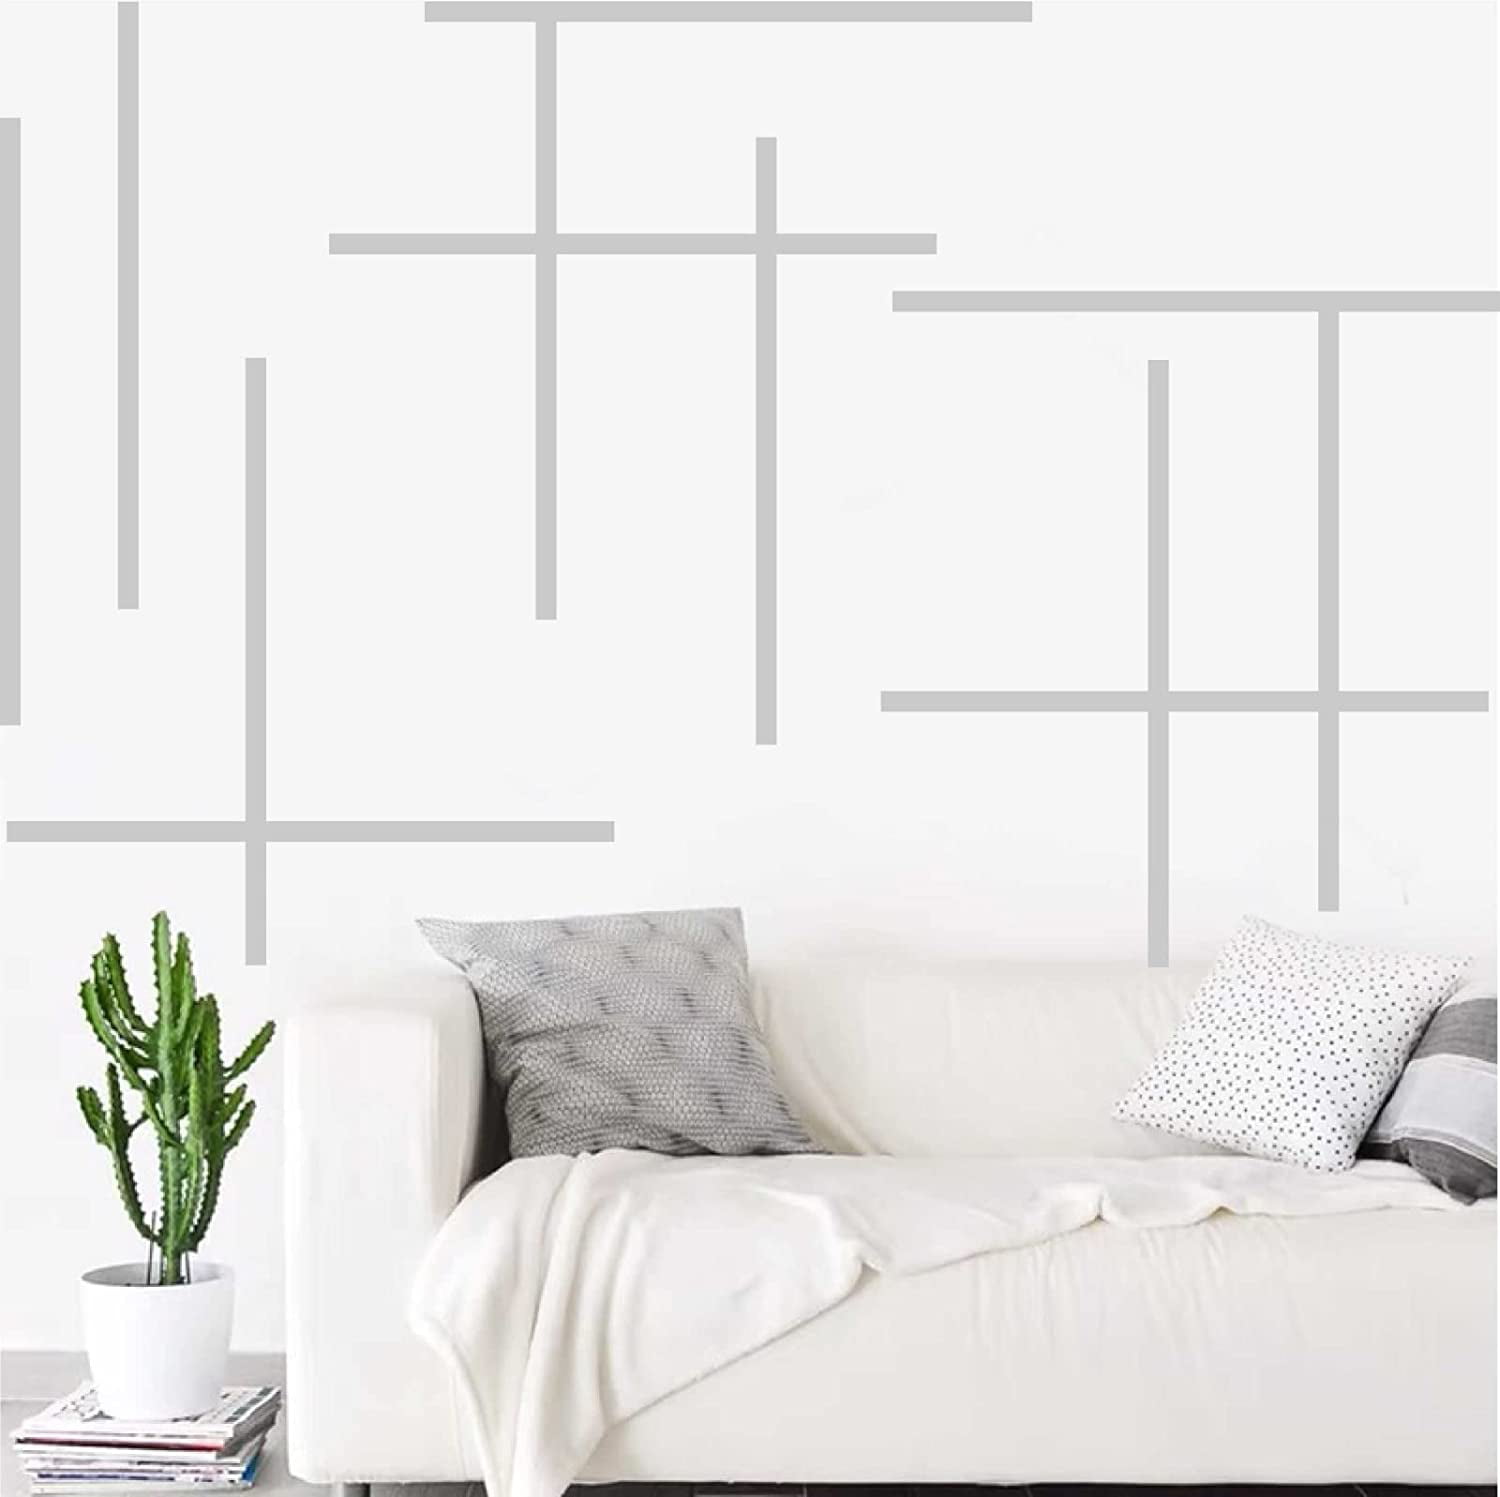 Line Wall Decals Boho Wall Decal Modern Wall Stickers Vinyl Wall Decals Removable Peel and Stick Wall Decals for Bedroom Living Room